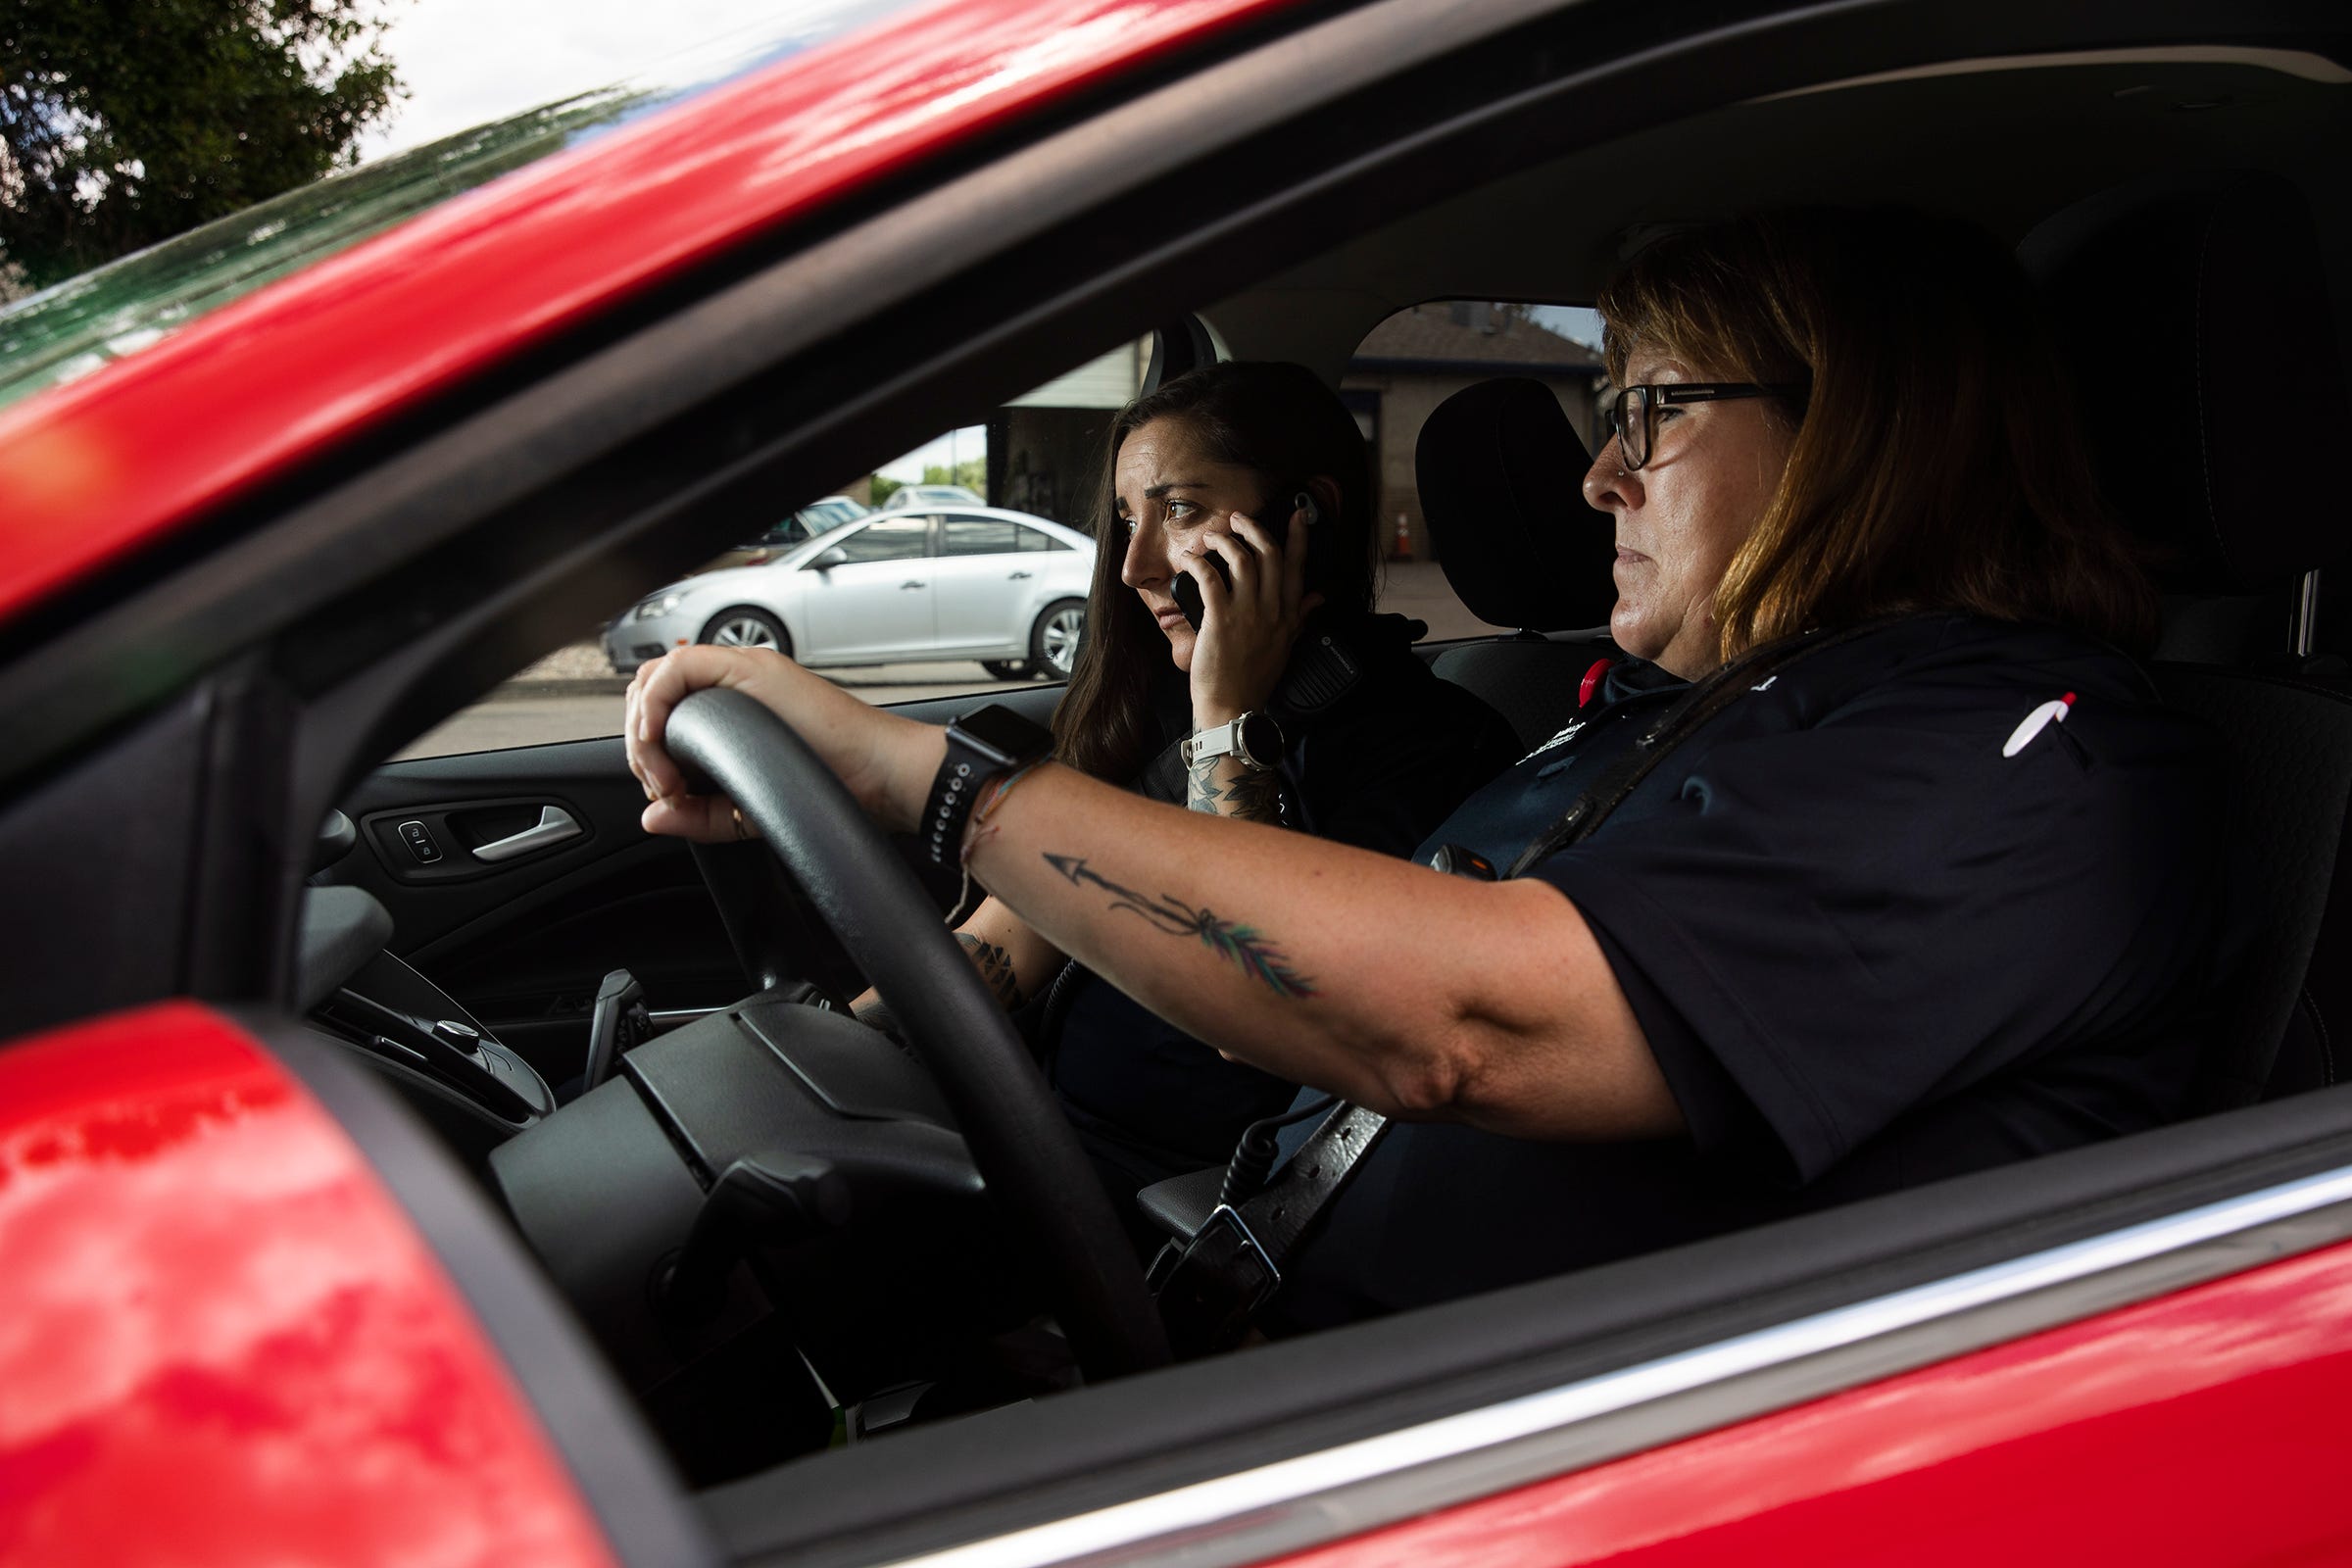 UCHealth community program coordinator and licensed clinician Stephanie Booco, left, and community paramedic Julie Bower take a call from Fort Collins Police Services.